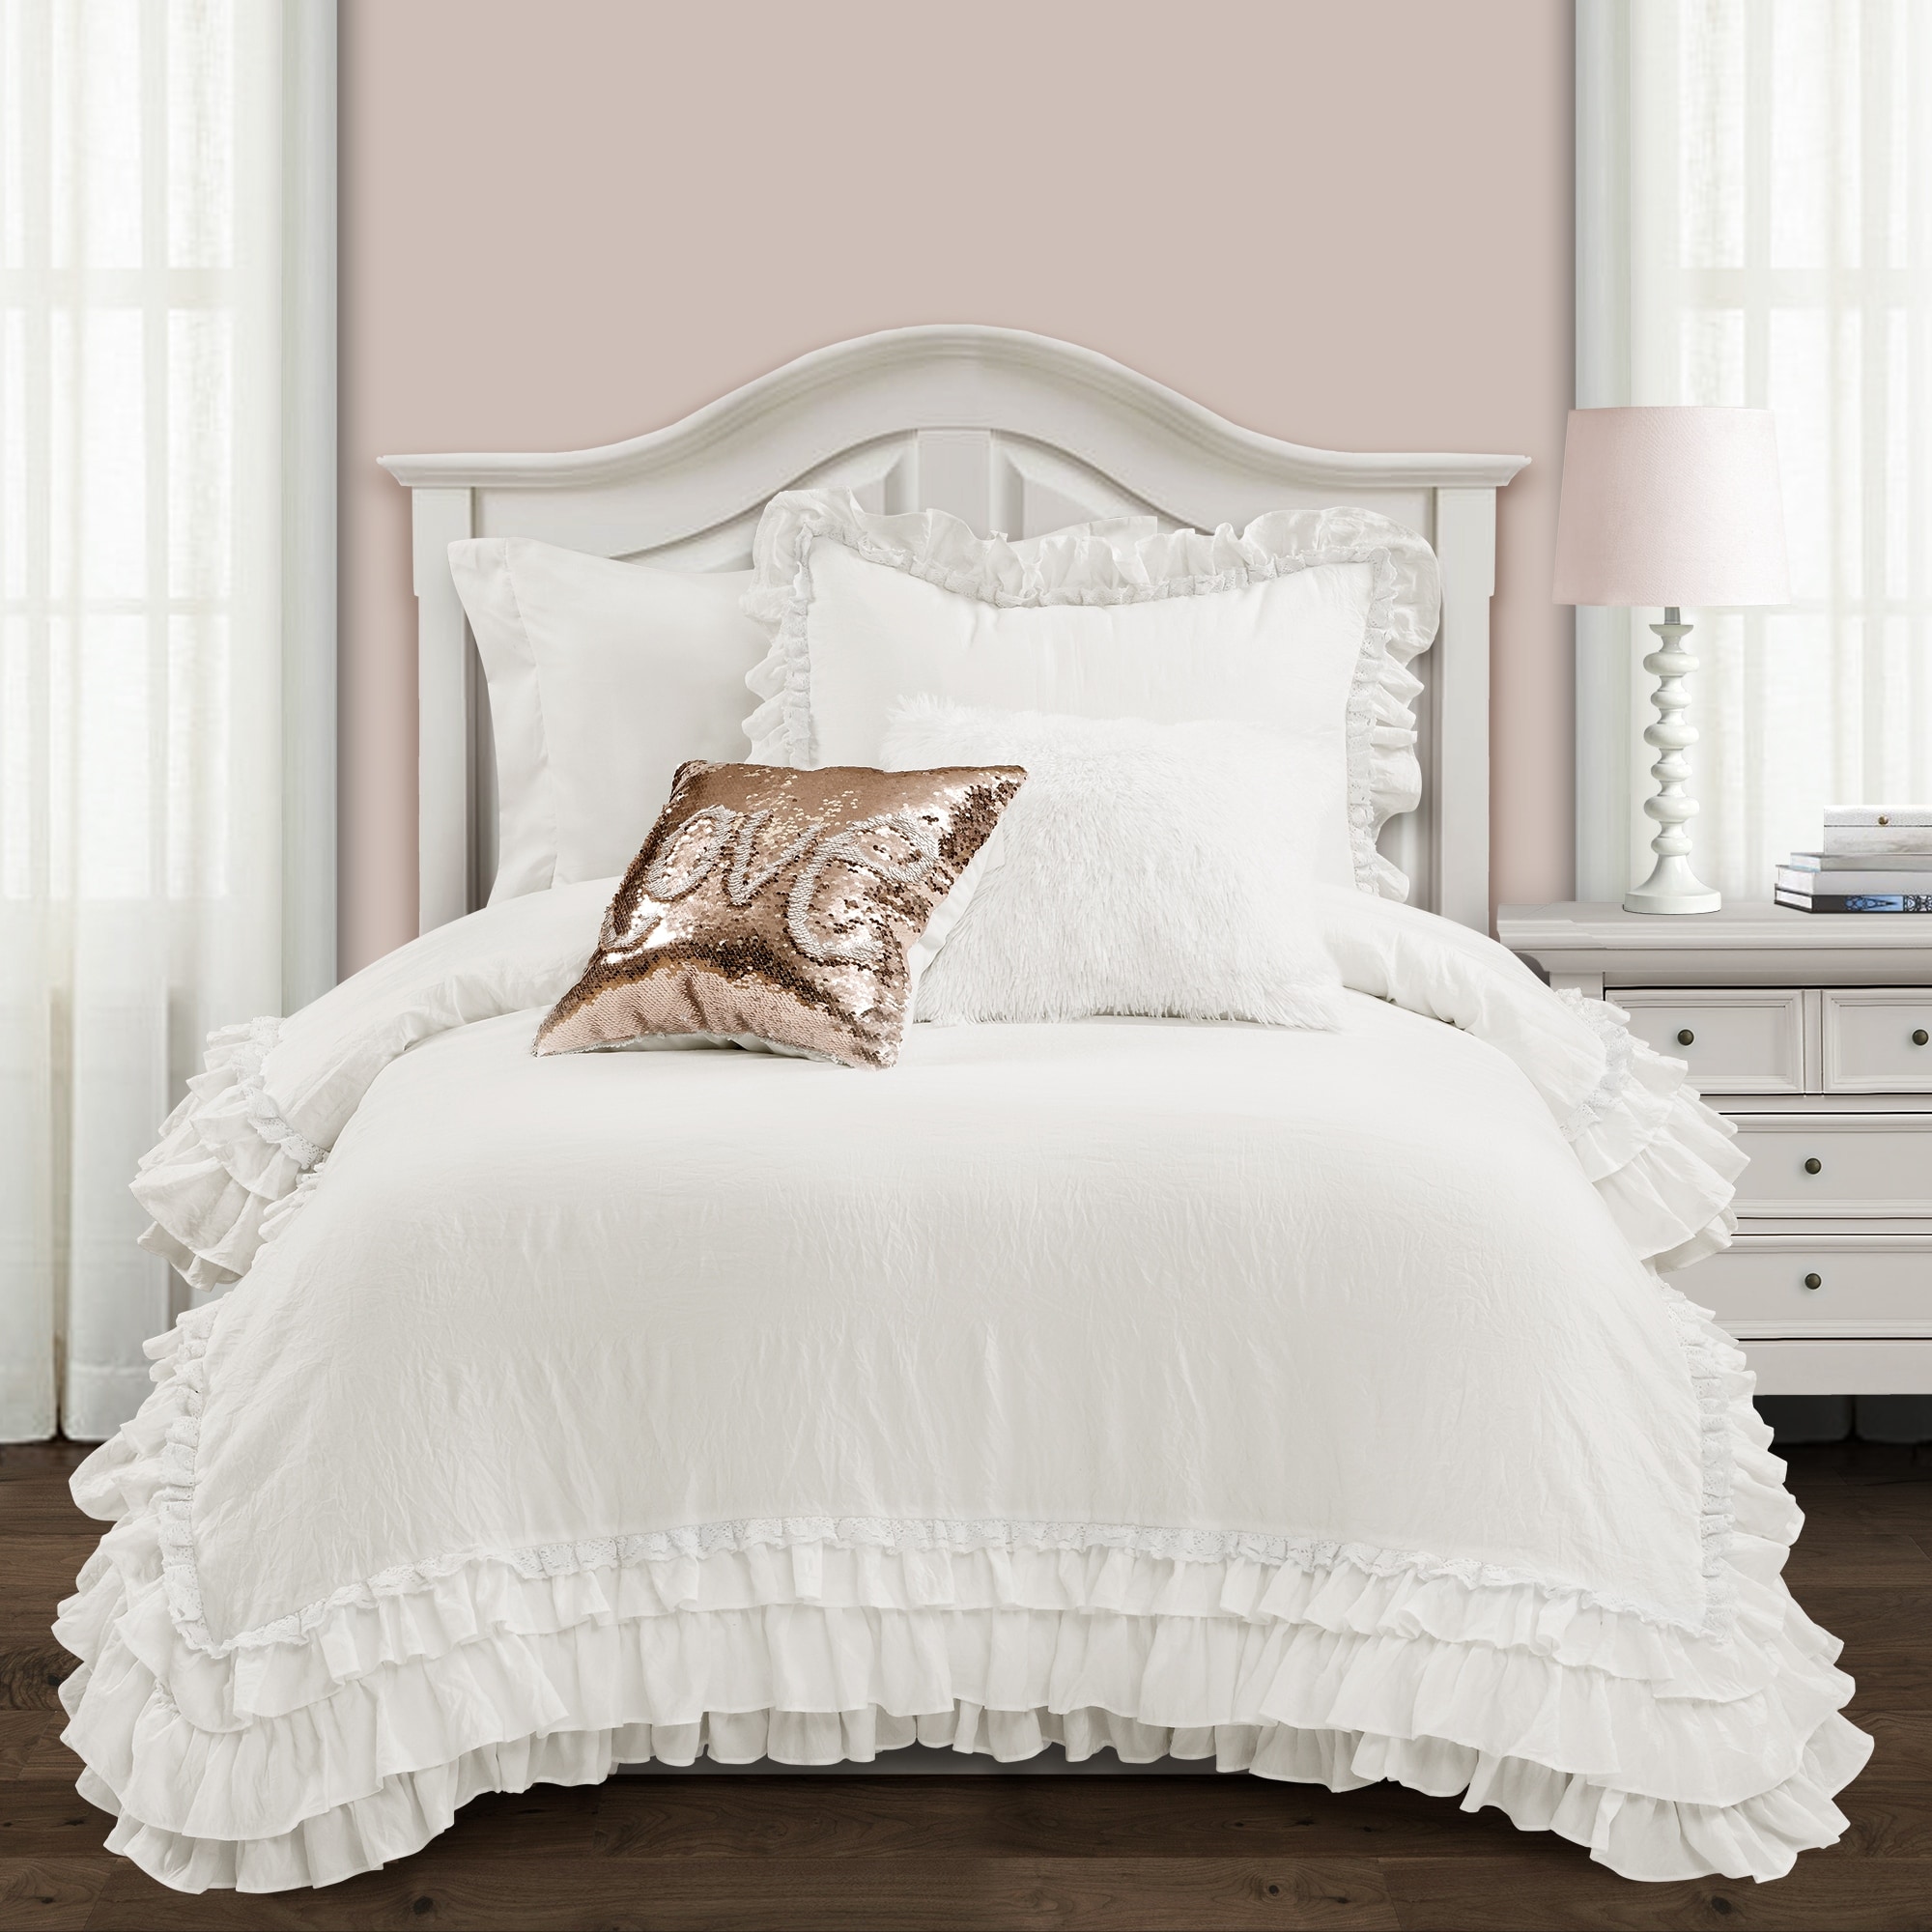 HIG 3 Piece Lace Ruffled Shabby Chic French Pastoral Style Comforter Set-Ivory 